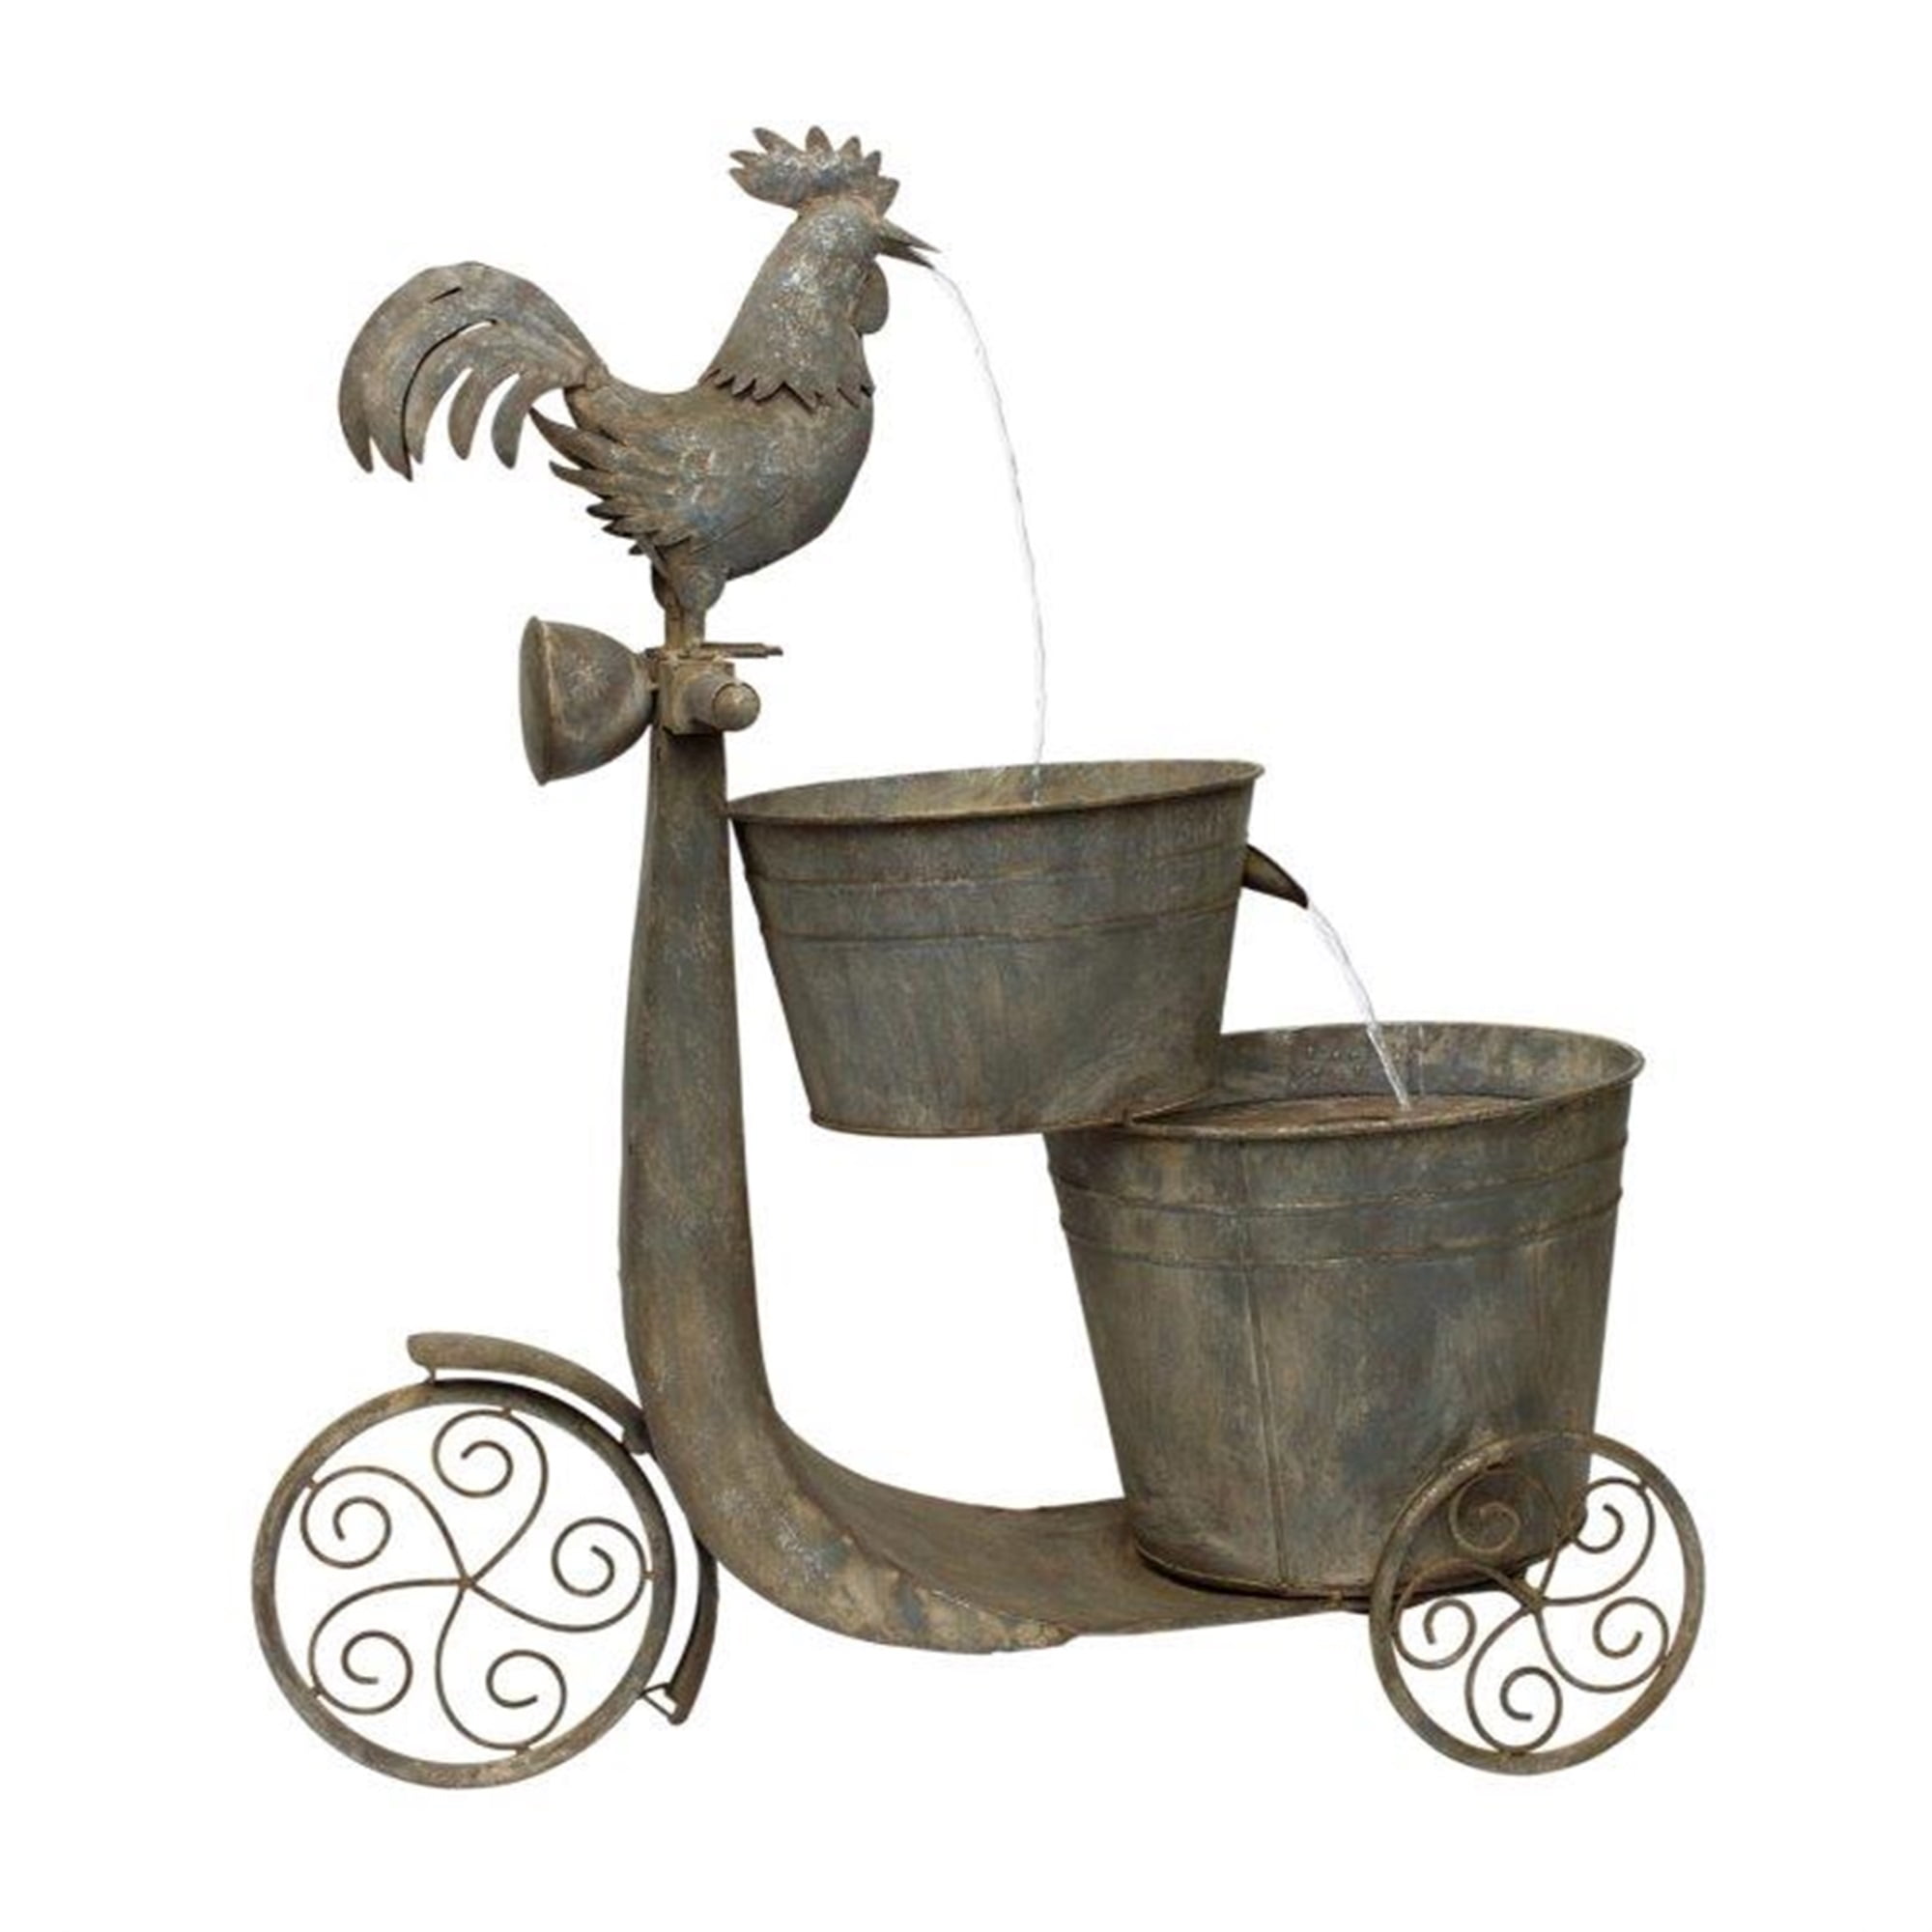 Chicken on Scooter Fountain 27.25"L x 31"H Iron